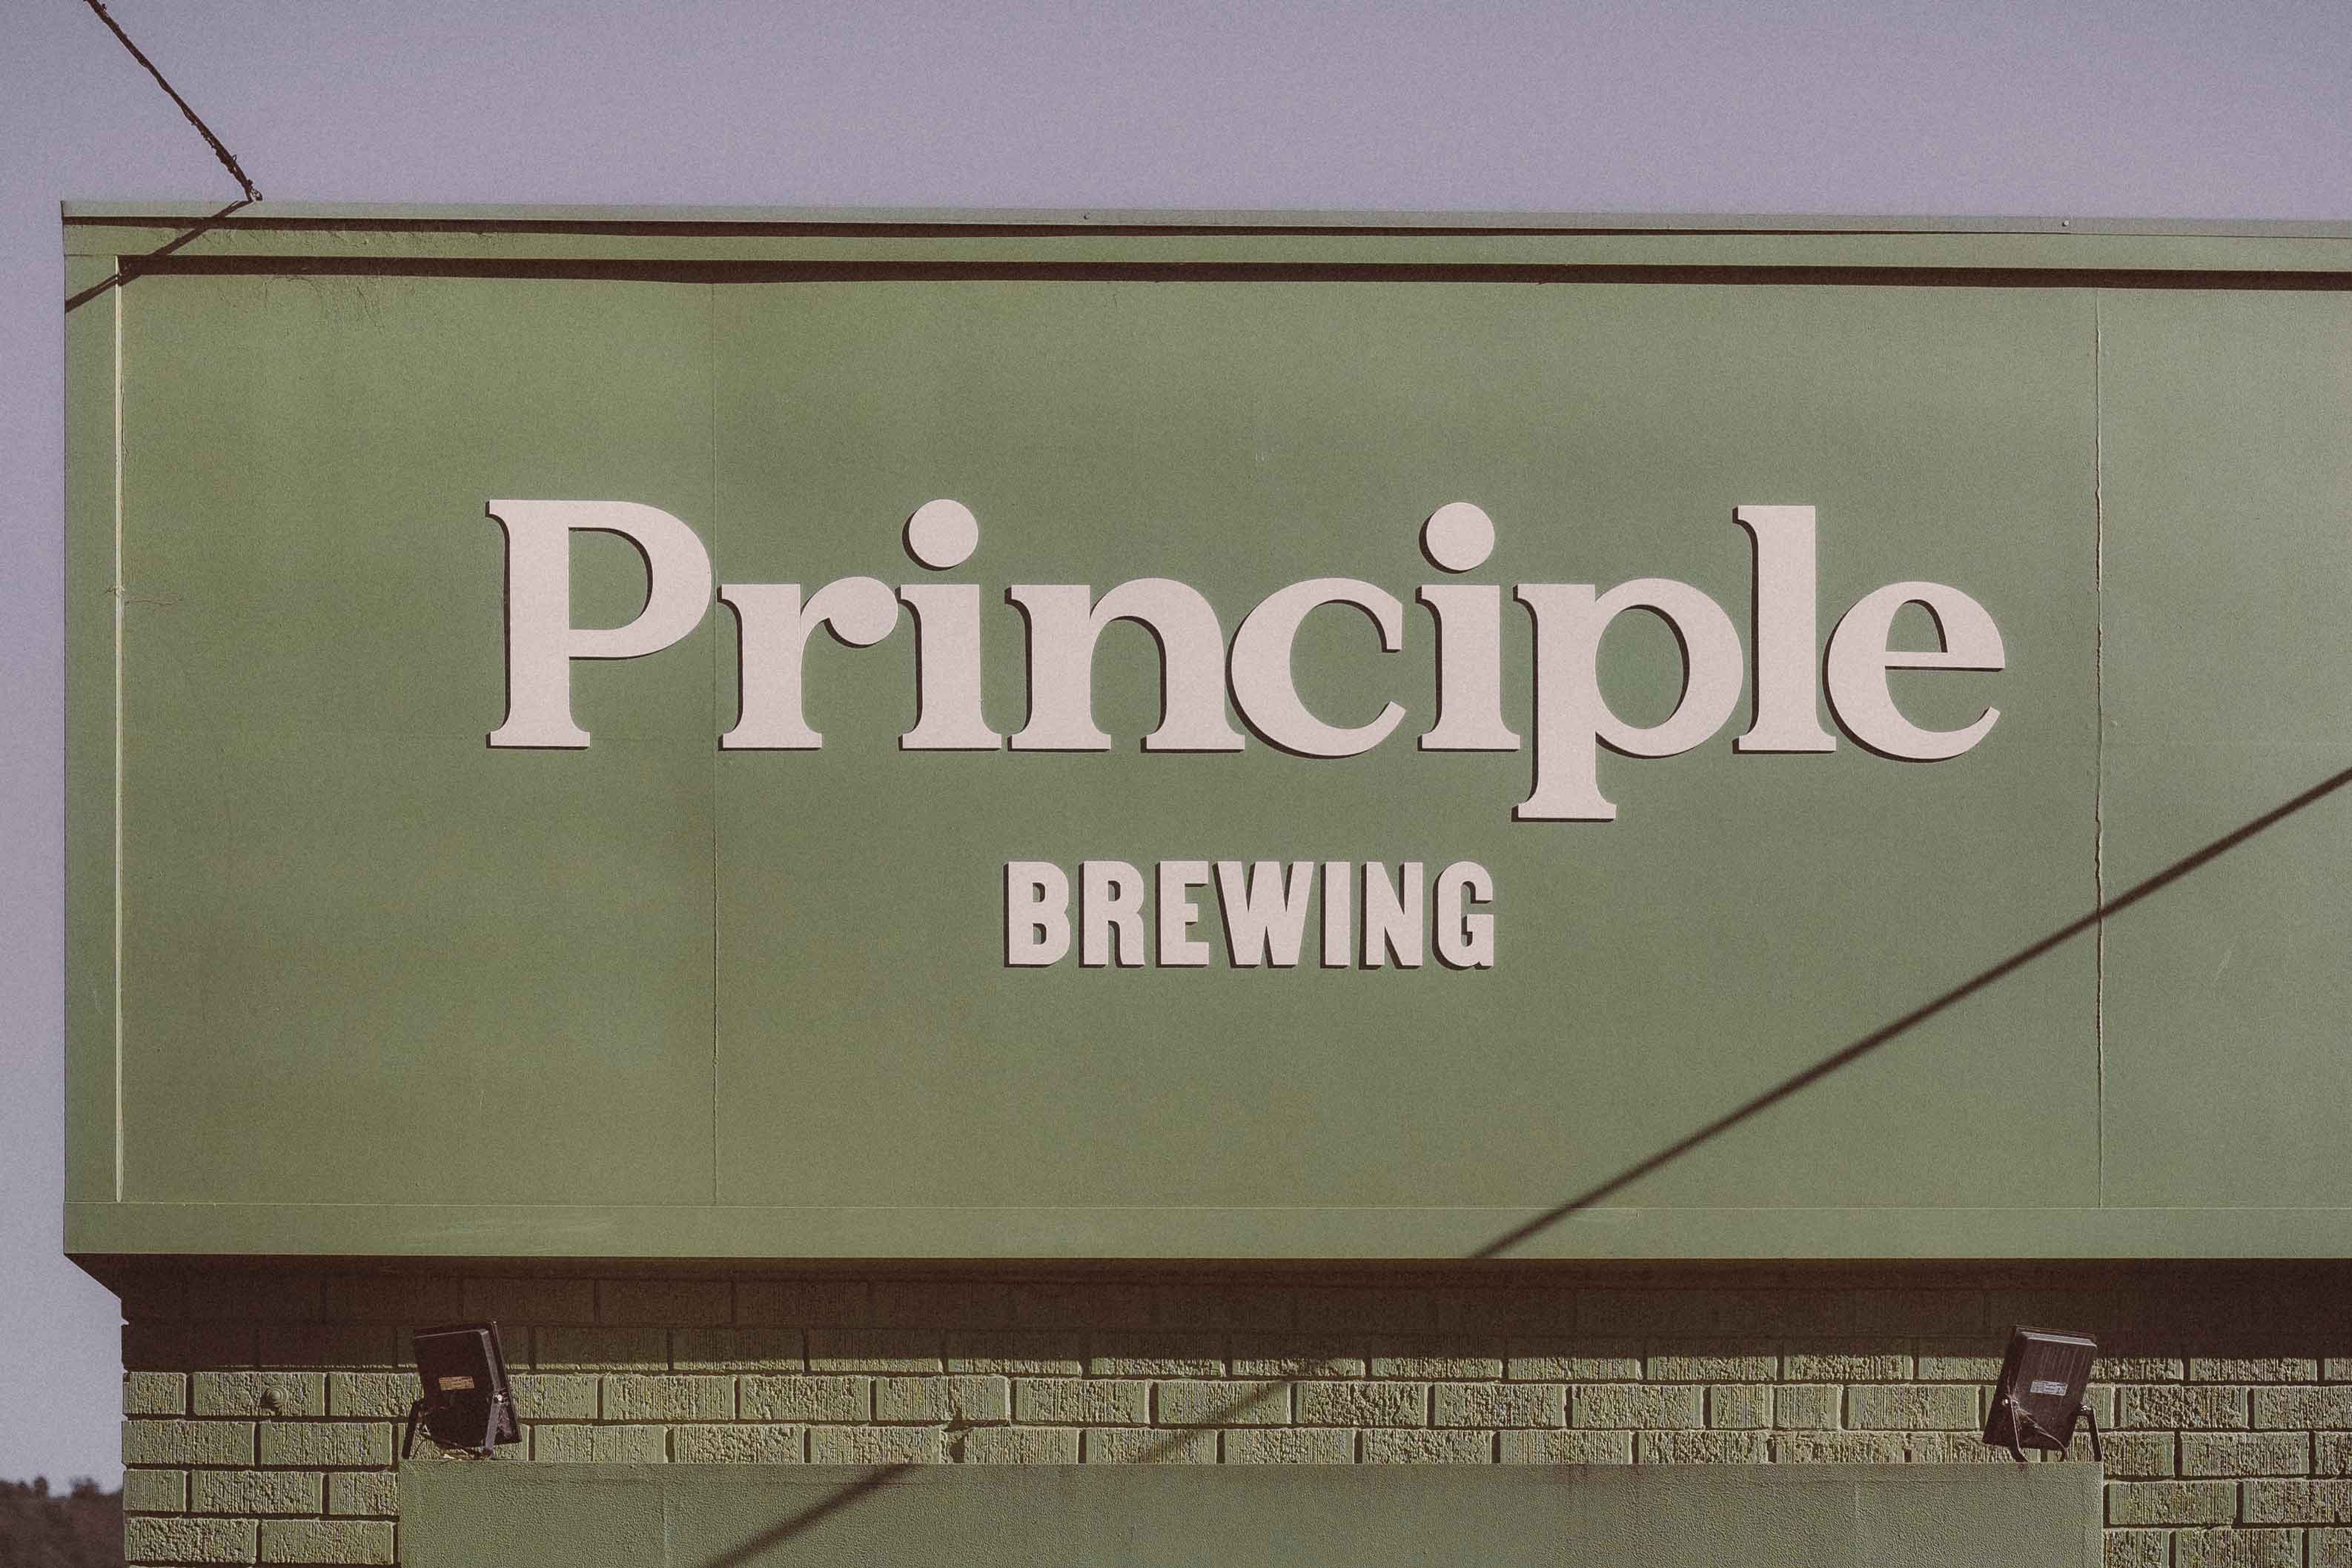 The Dreamers #77 - With Principle Brewing